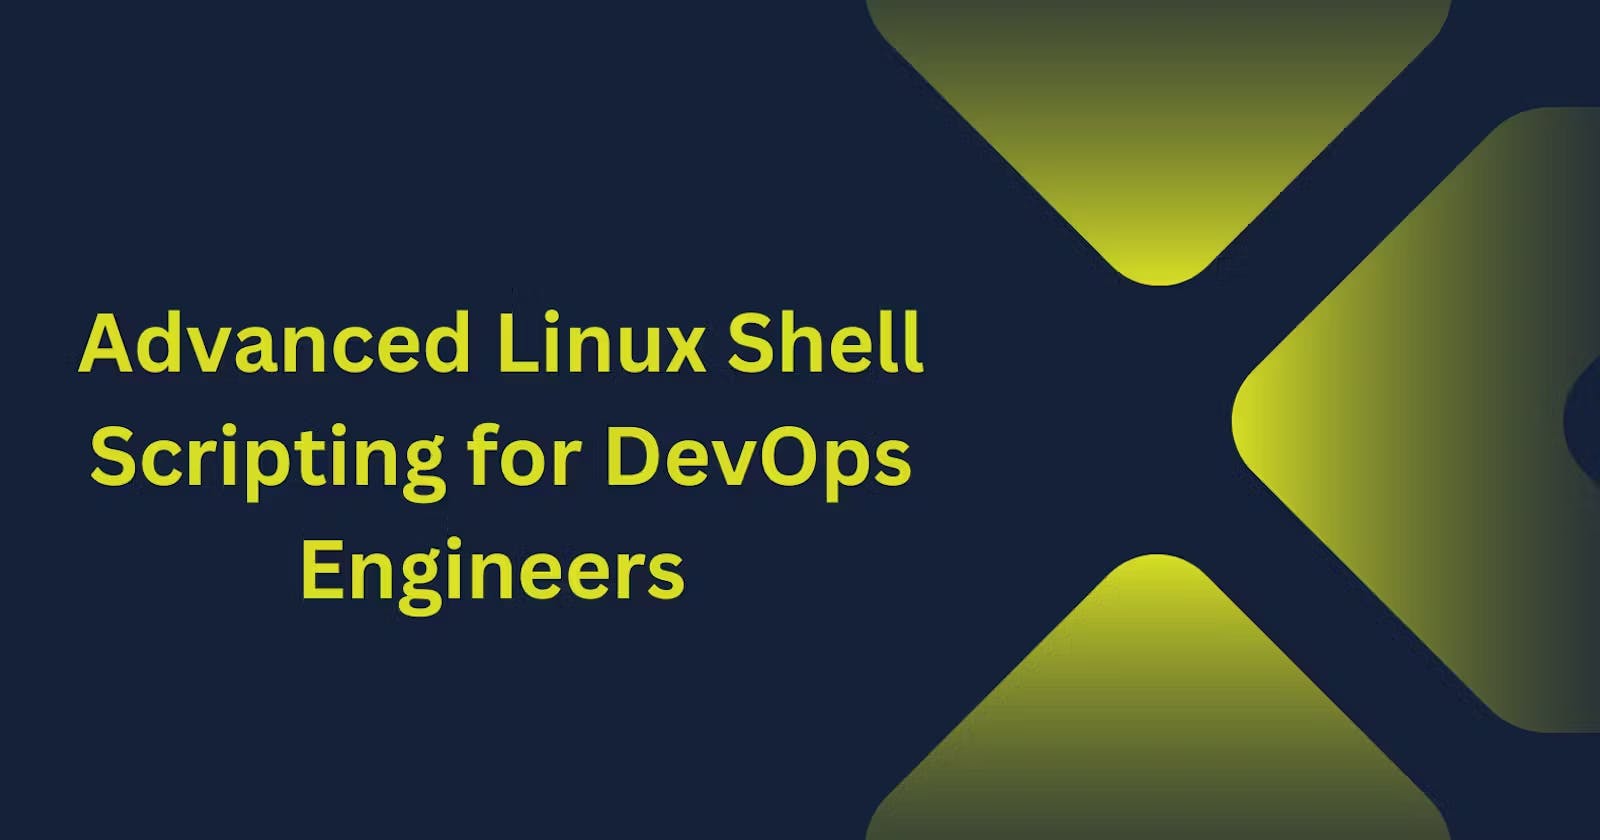 Advanced Linux Shell Scripting for DevOps Engineers with User Management